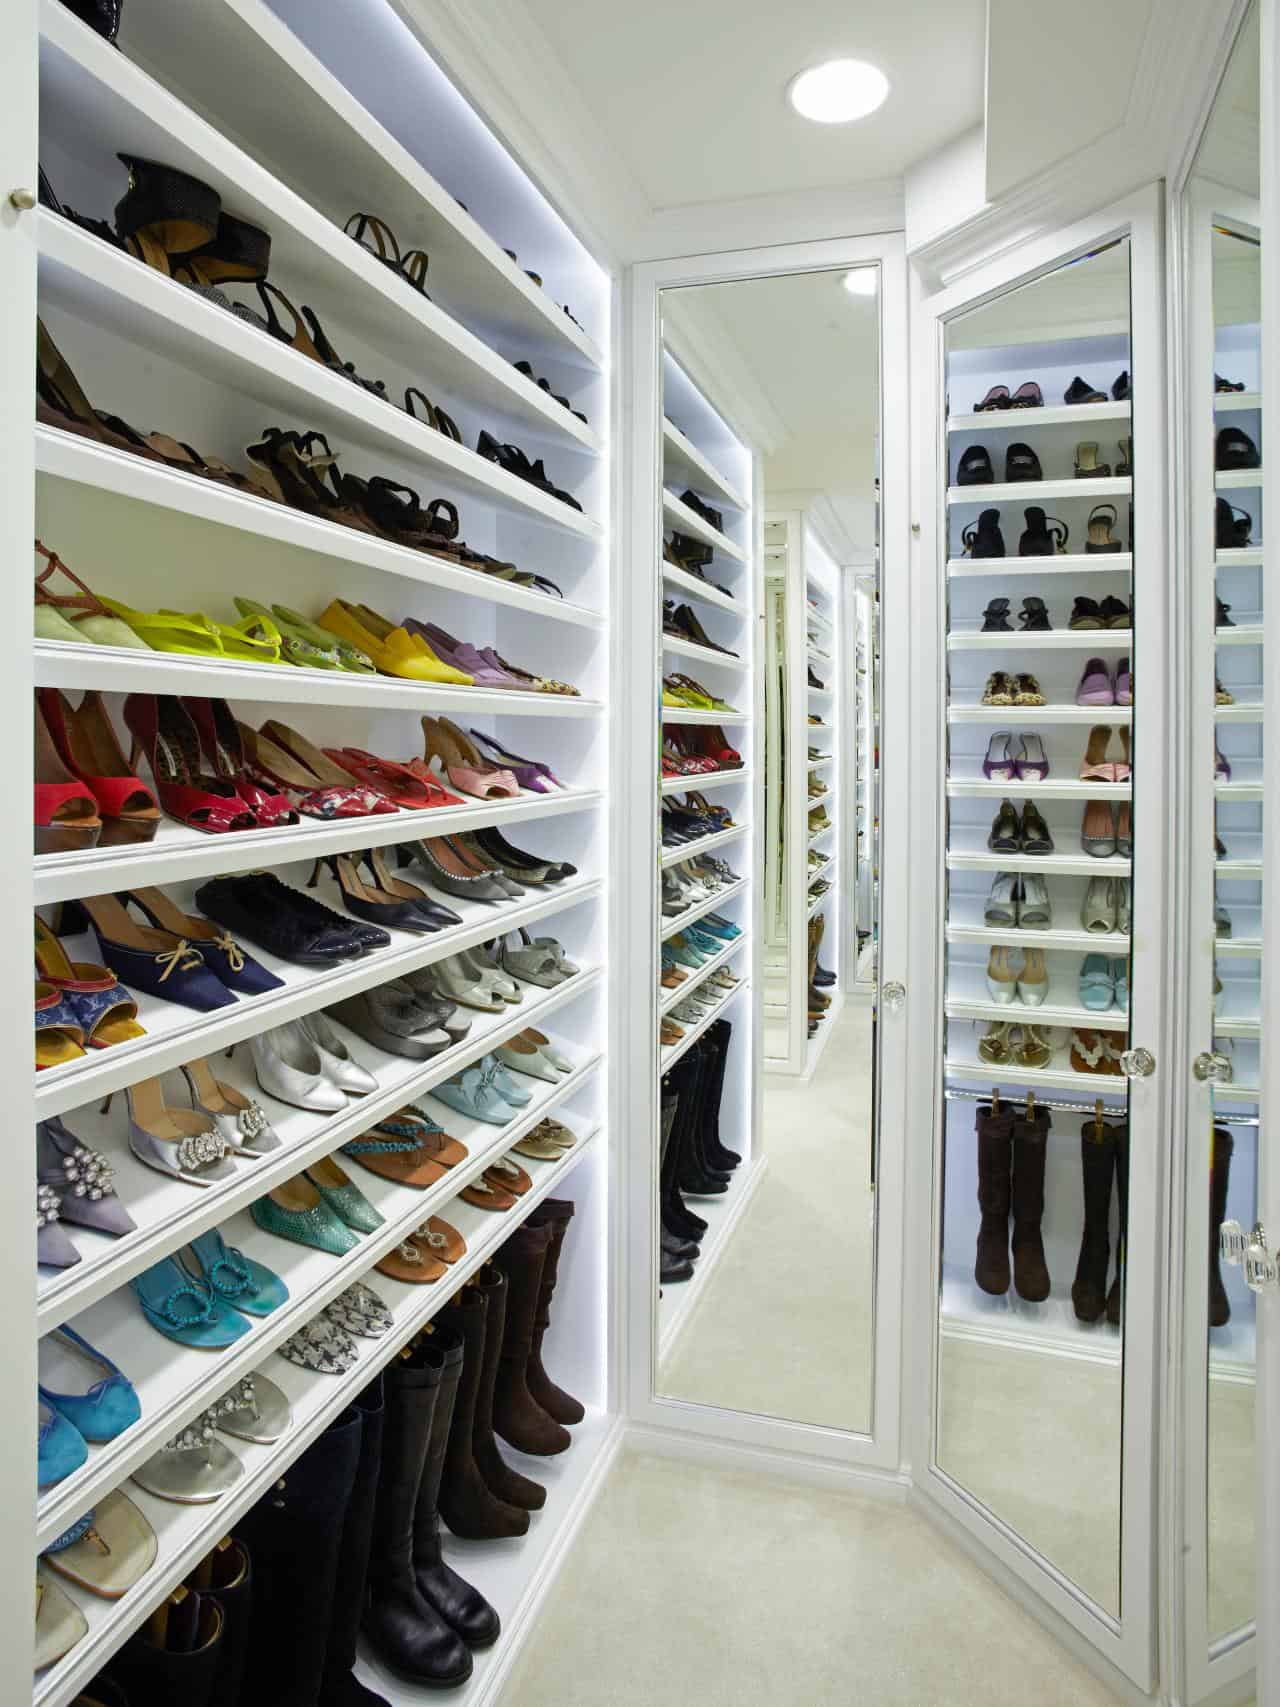 Organize your shoe wall starting from the bottom up.